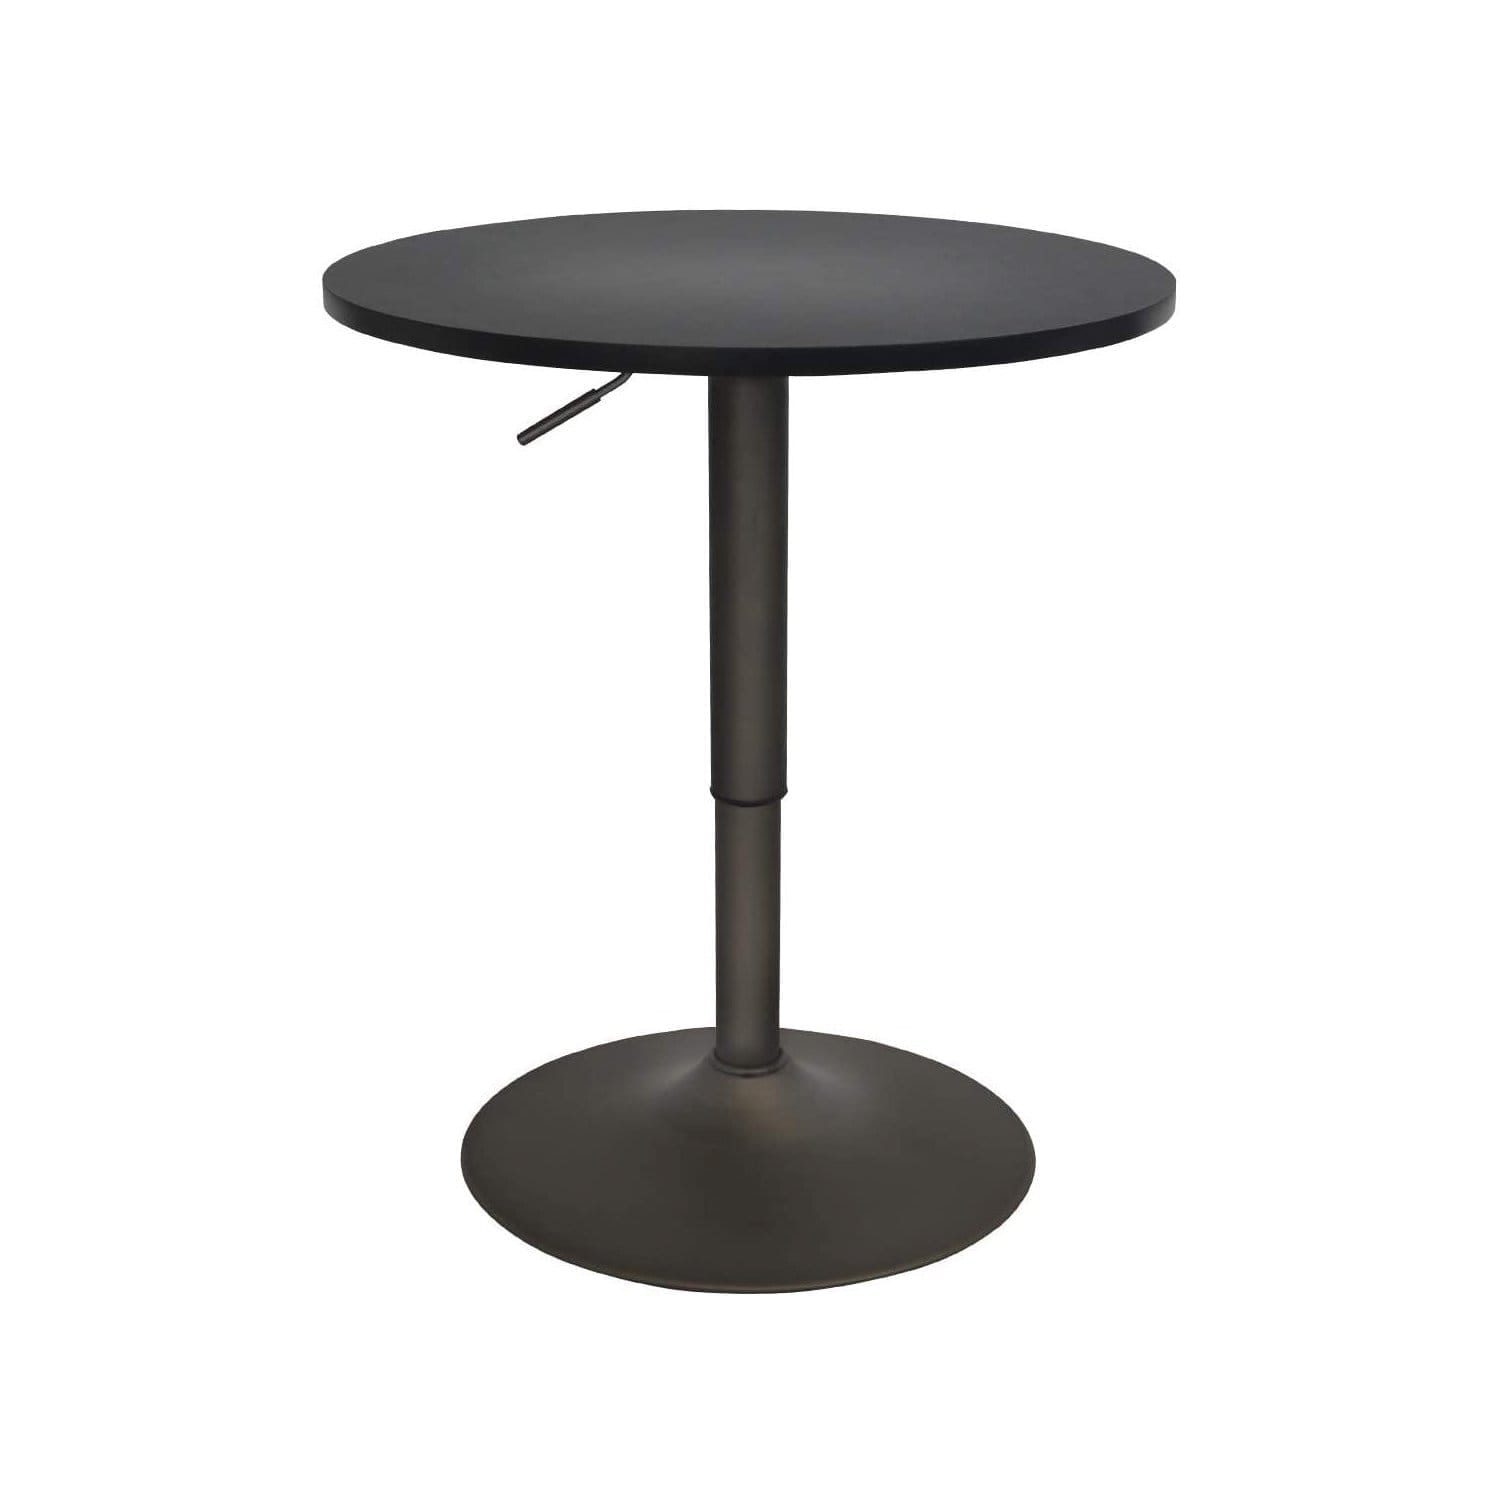 elecwish Bar Table Puluomis 24 Inches Round Bar Table Adjustable Height and Wood Cocktail Pub Table MDF Top 360°Swivel Furniture